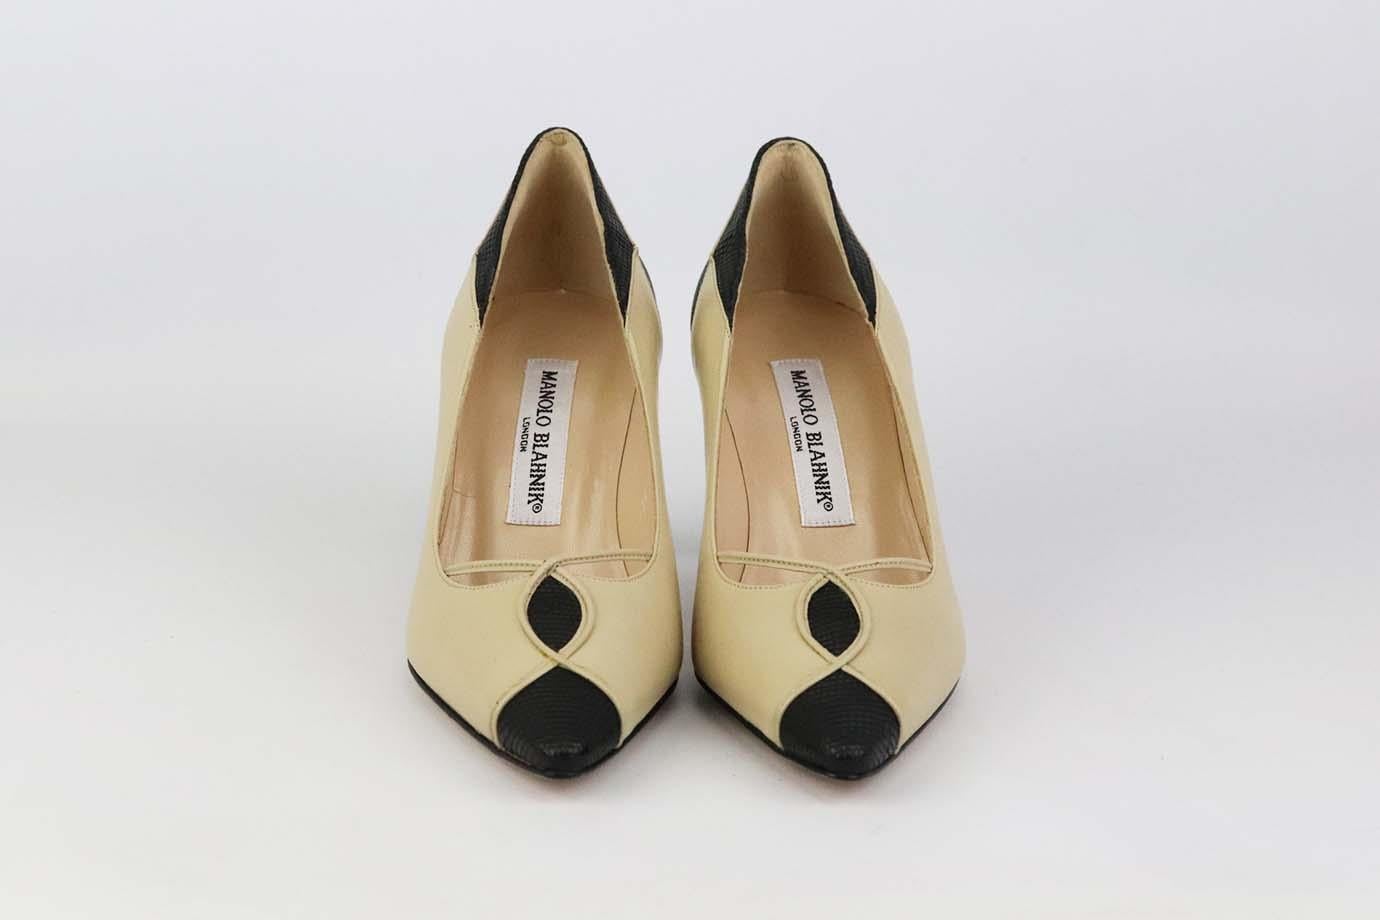 These Vintage pumps by Manolo Blahnik are a classic style that will never date, made in Italy from supple black grosgrain and red suede, they have pointed toes, cutout detail at the side and comfortable 63 mm heels to take you from morning meetings